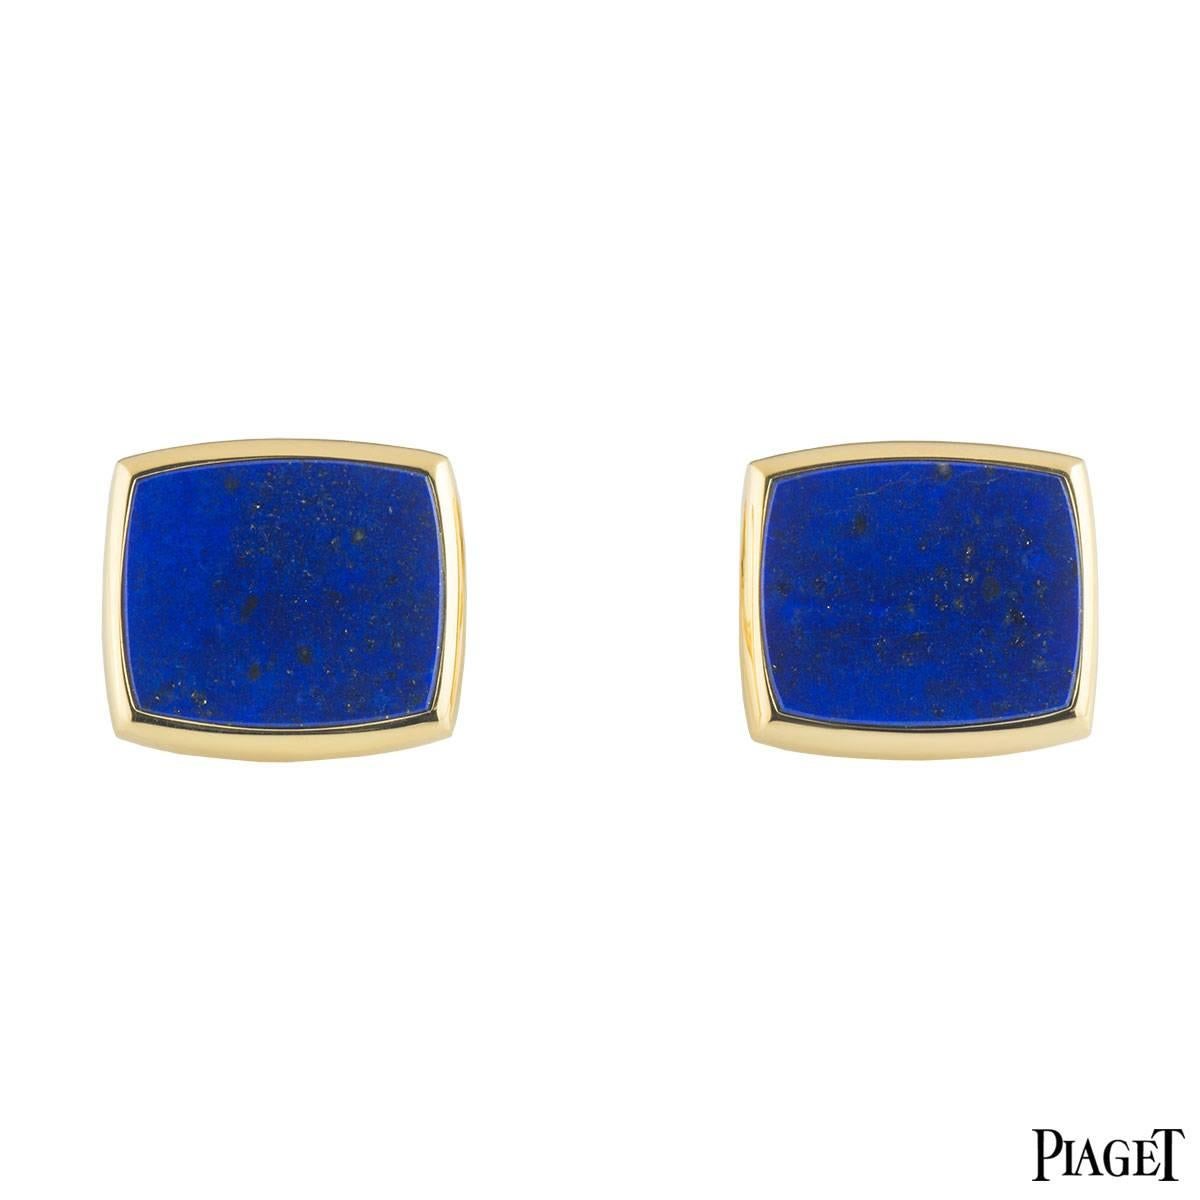 A stylish pair of 18k yellow gold lapis lazuli cufflinks by Piaget. Each cufflink is set to the front with a lapis lazuli in a rubover setting. The cufflinks measure 1.8cm in height and 2cm in width. The cufflinks have T-bar fittings and have a